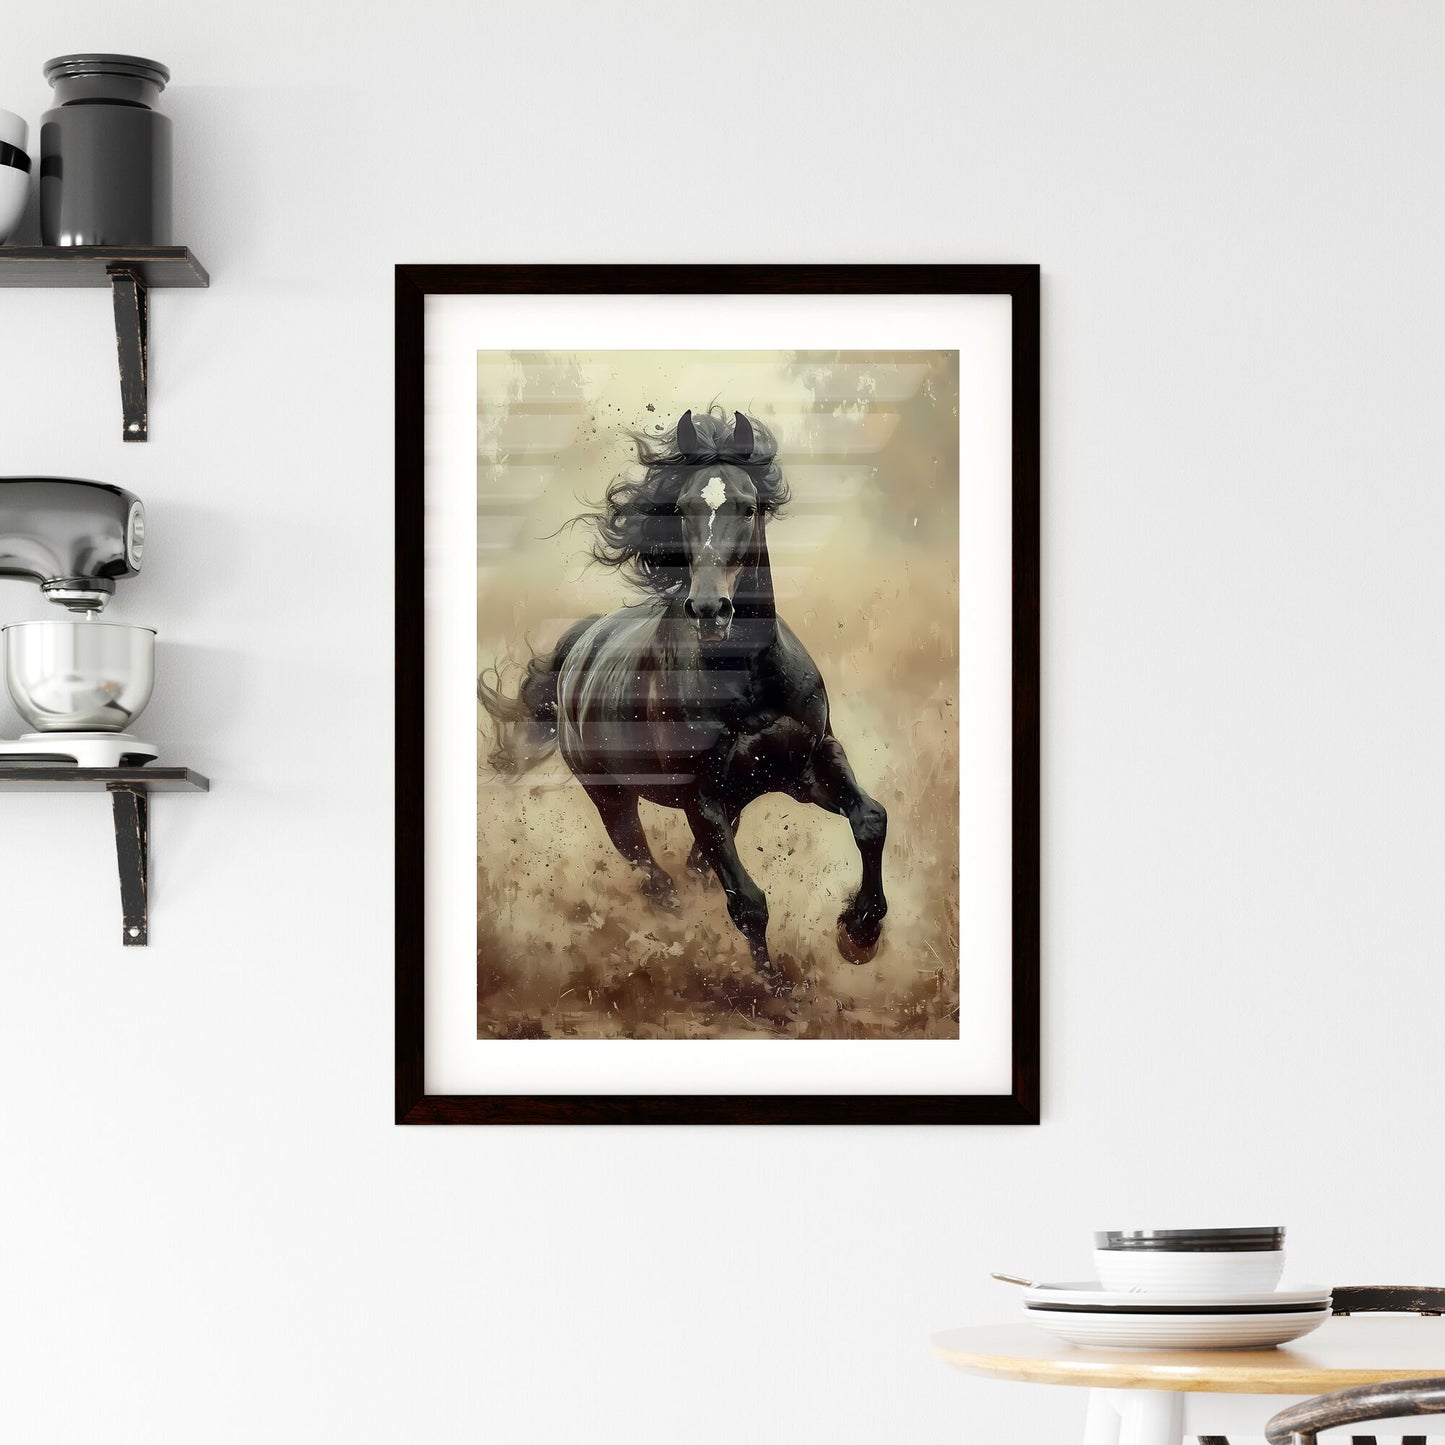 A vintage painting featuring a wild black horse - Art print of a black horse running in a field Default Title